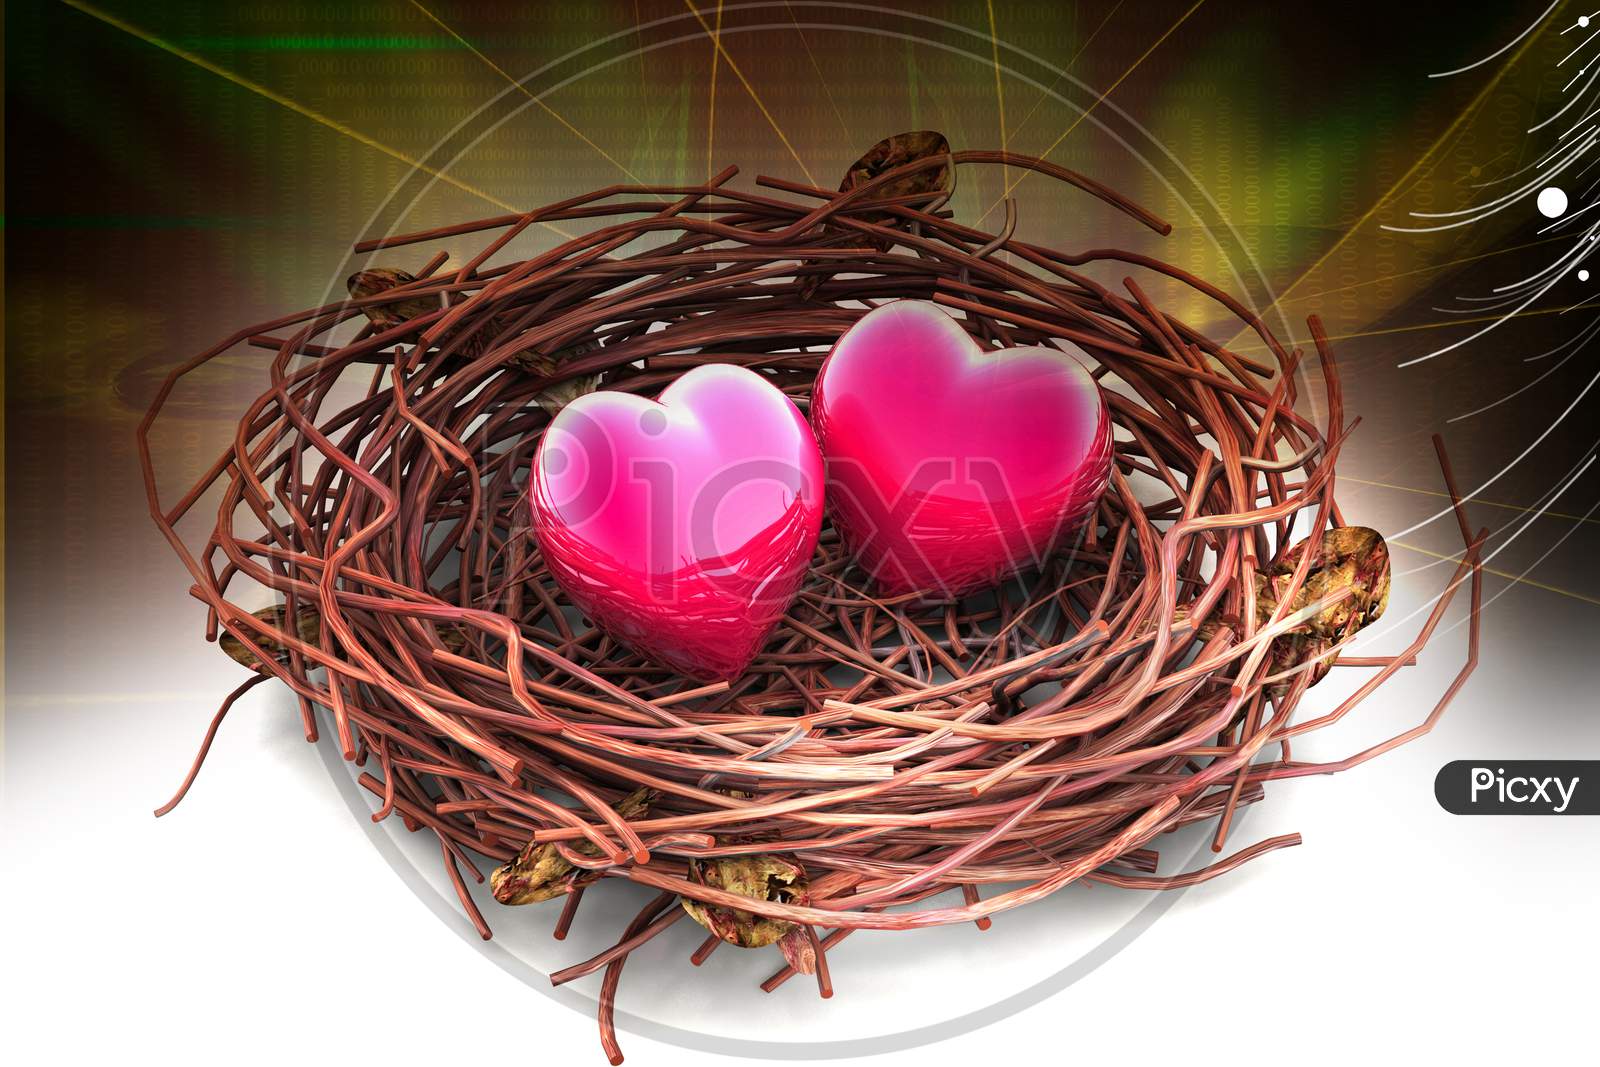 Two Love Hearts In Being Protected In A Nest. Conceptual Design